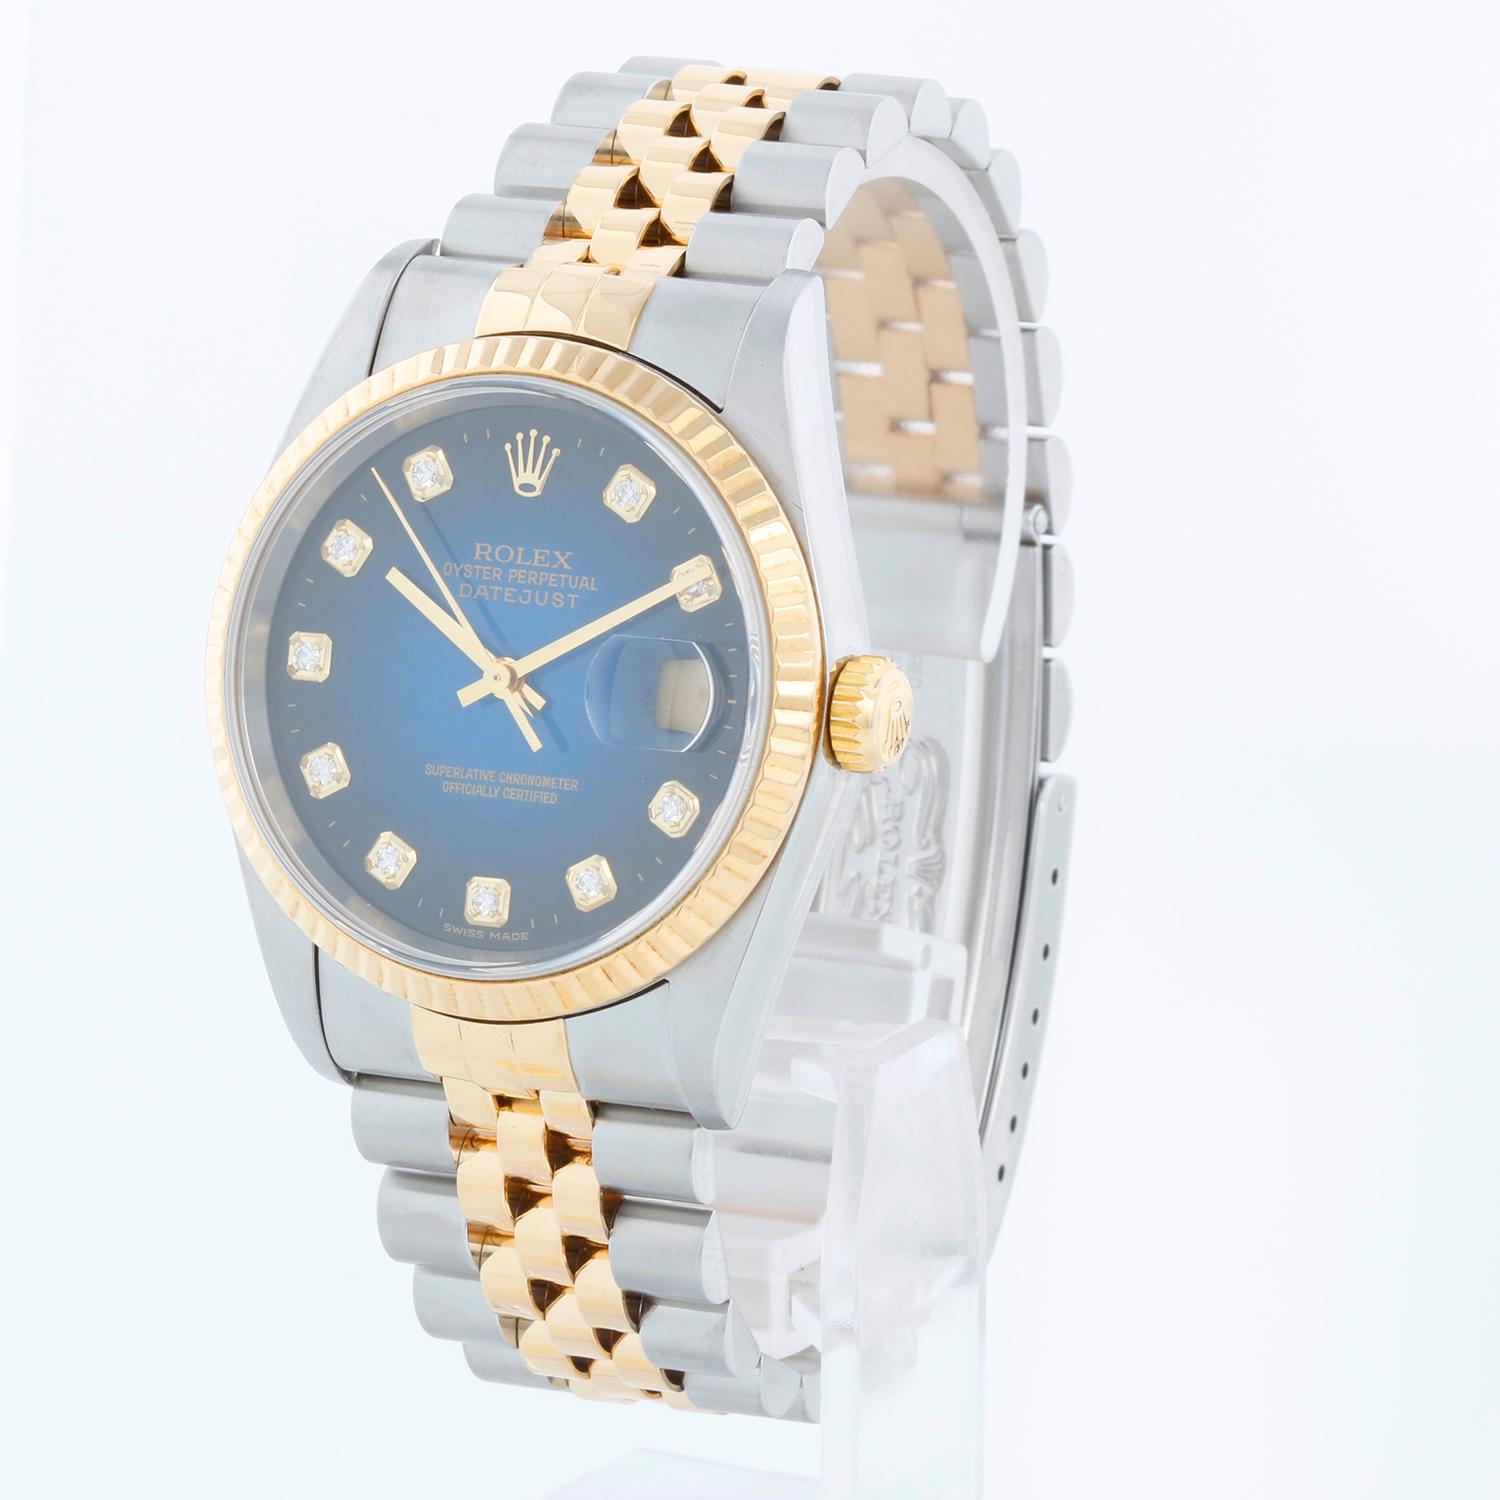 Rolex Datejust Men's 2-Tone Watch  Blue Vignette Dial 16233 - Automatic winding, 31 jewels, Quickset, sapphire crystal. Stainless steel with 18k yellow gold fluted bezel (36mm diameter). Factory blue vignette dial. Stainless steel and 18k yellow